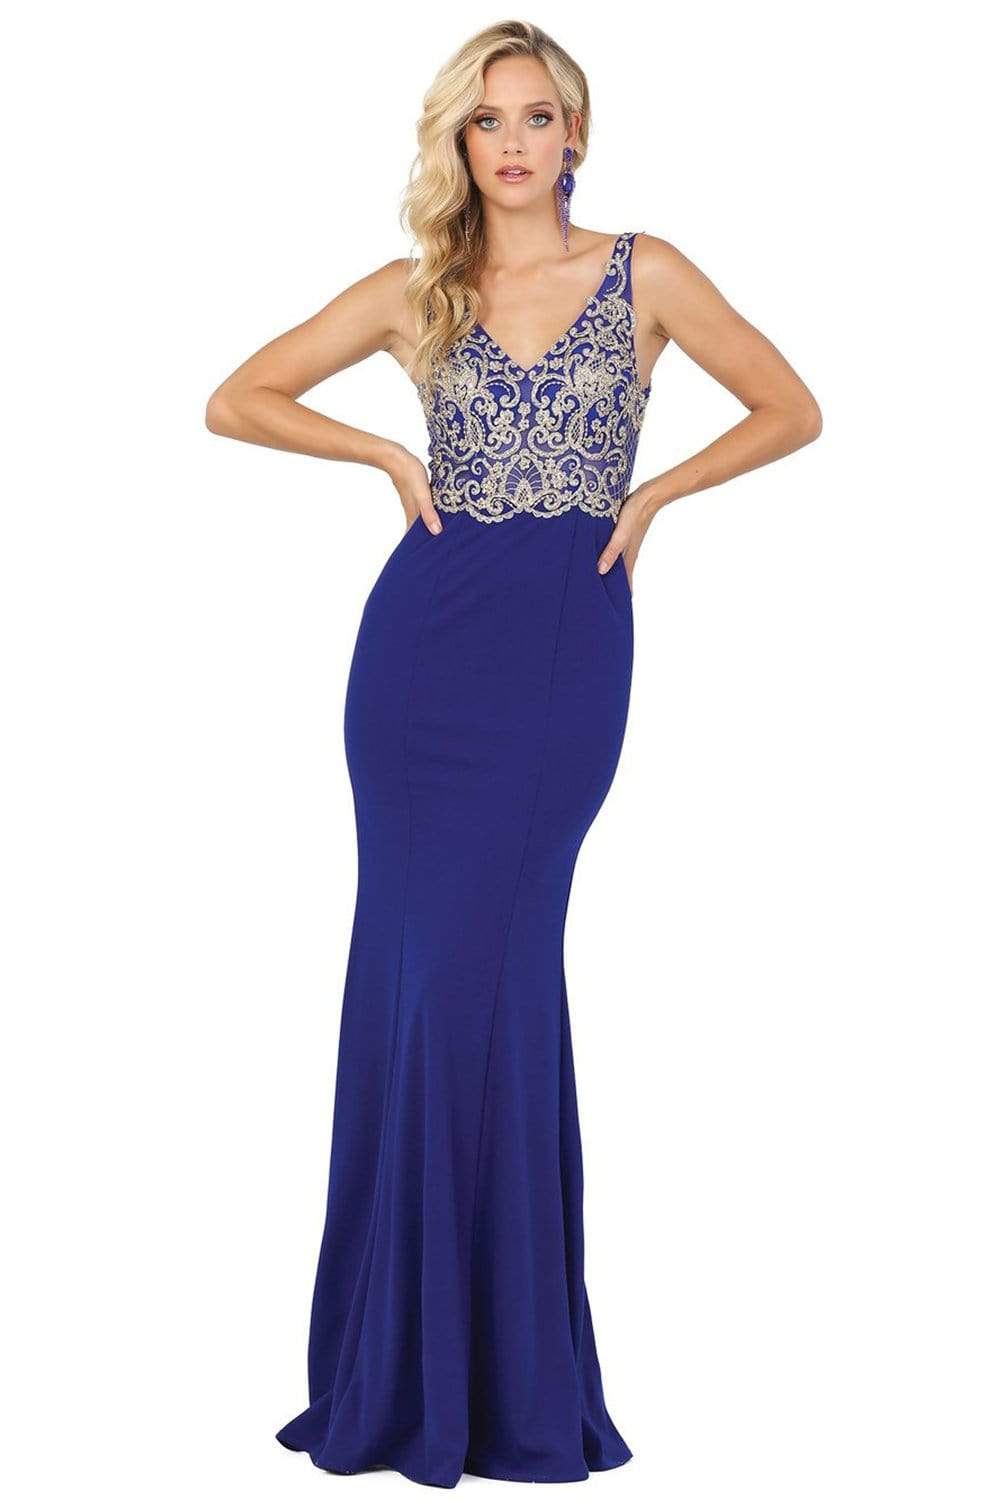 Dancing Queen - 2912 Sleeveless V Neck Lace Applique Long Prom Dress Evening Dresses XS / Royal Blue